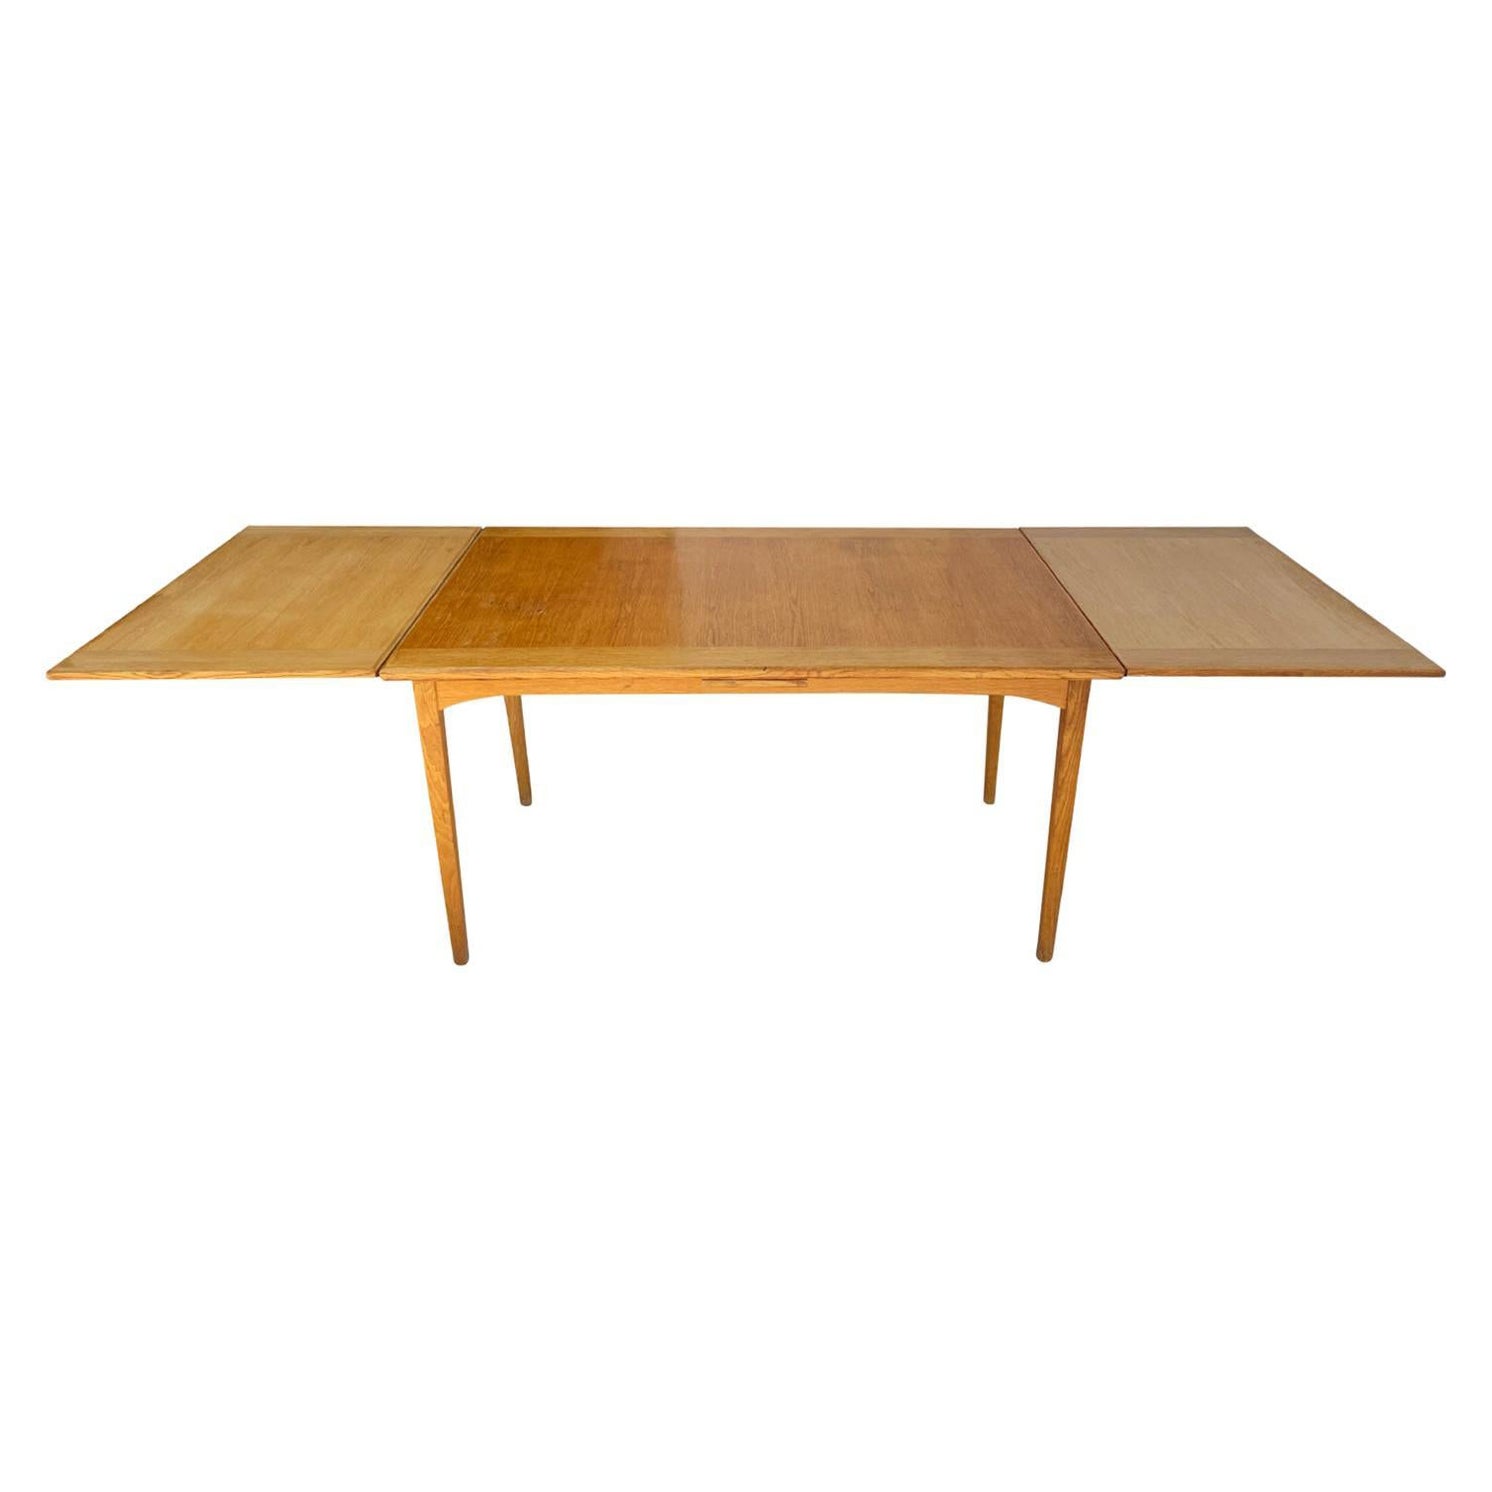 20th Century Swedish Mid-Century Extendable Walnut Dining Table by Carl Malmsten For Sale